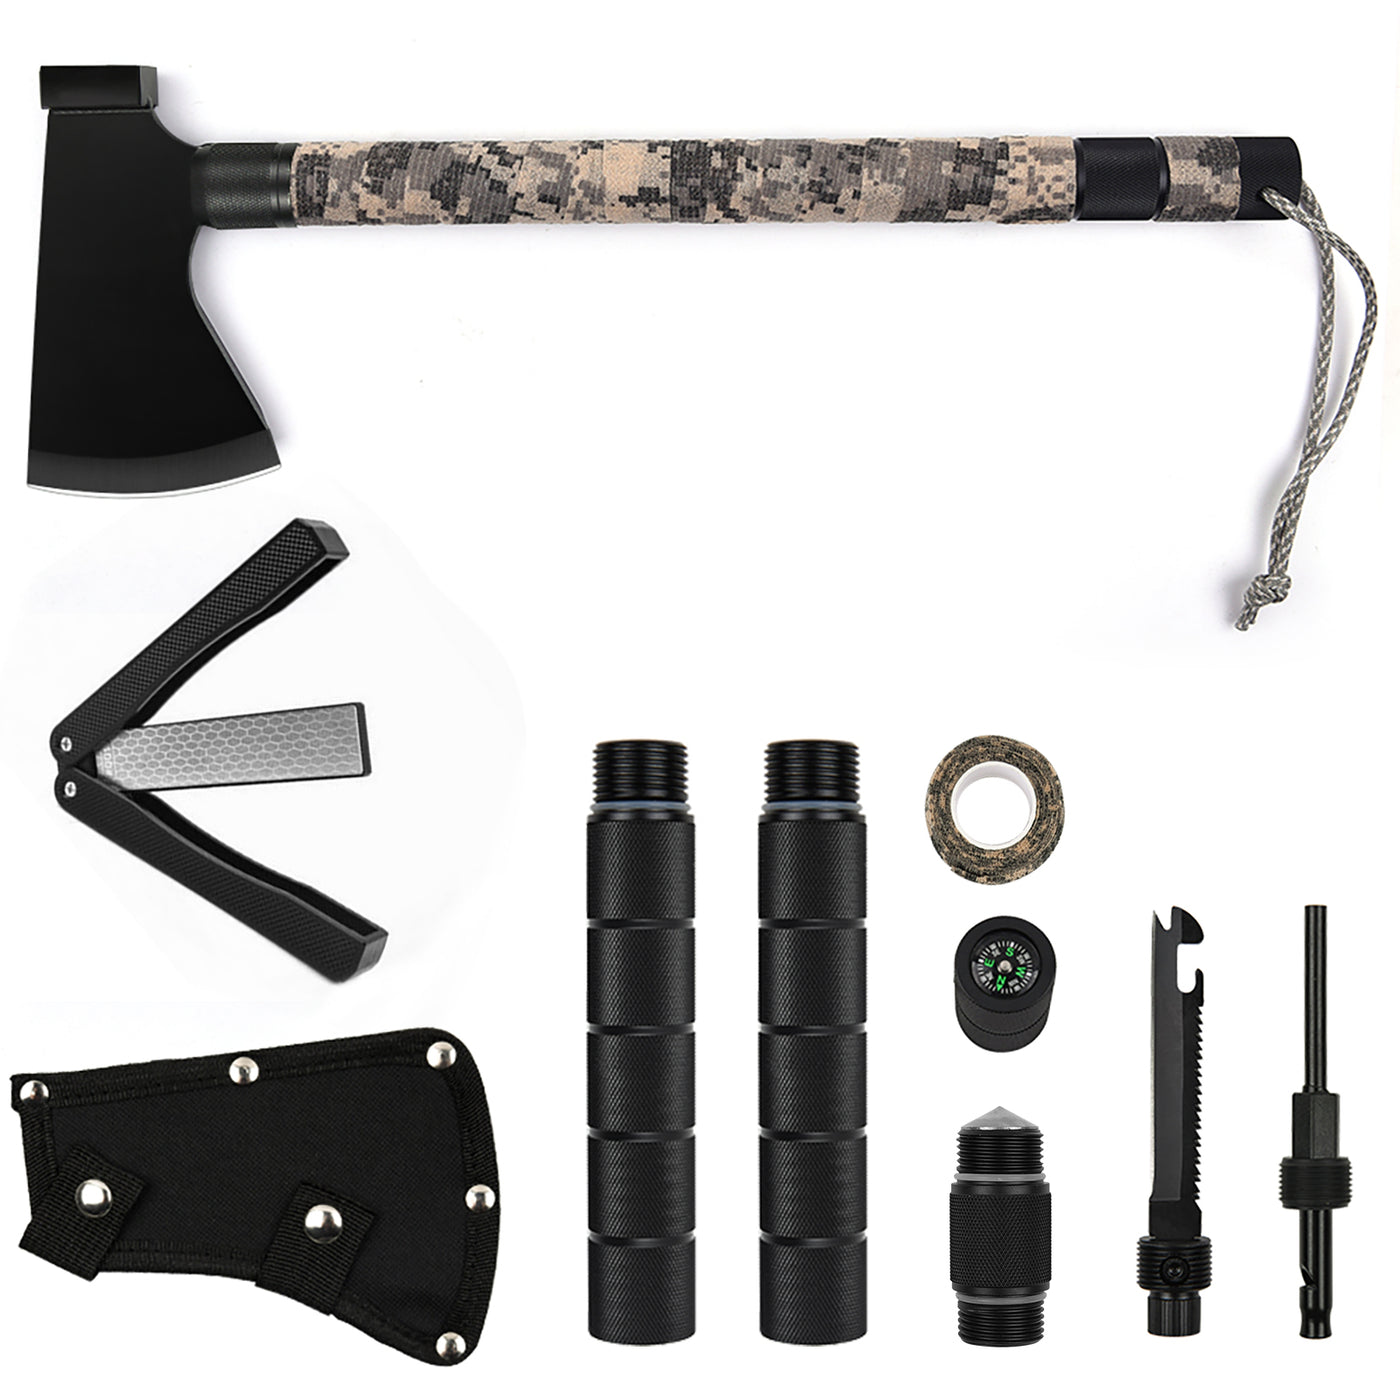 Yeacool Camping Hatchet, Survival Axe, with Sharpener, Sheath, Tactica